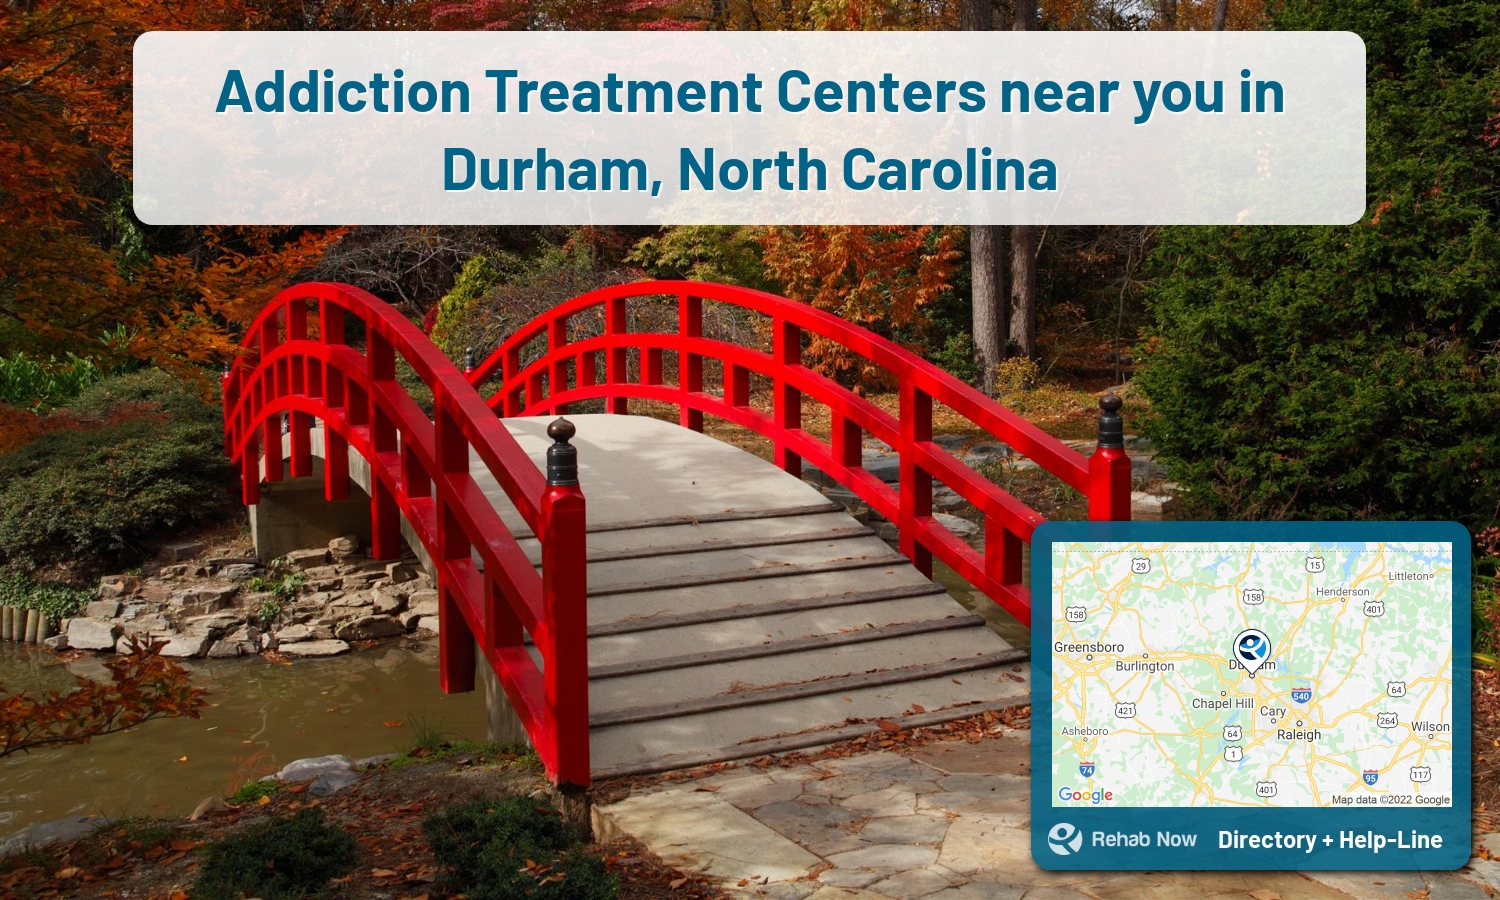 Durham, NC Treatment Centers. Find drug rehab in Durham, North Carolina, or detox and treatment programs. Get the right help now!